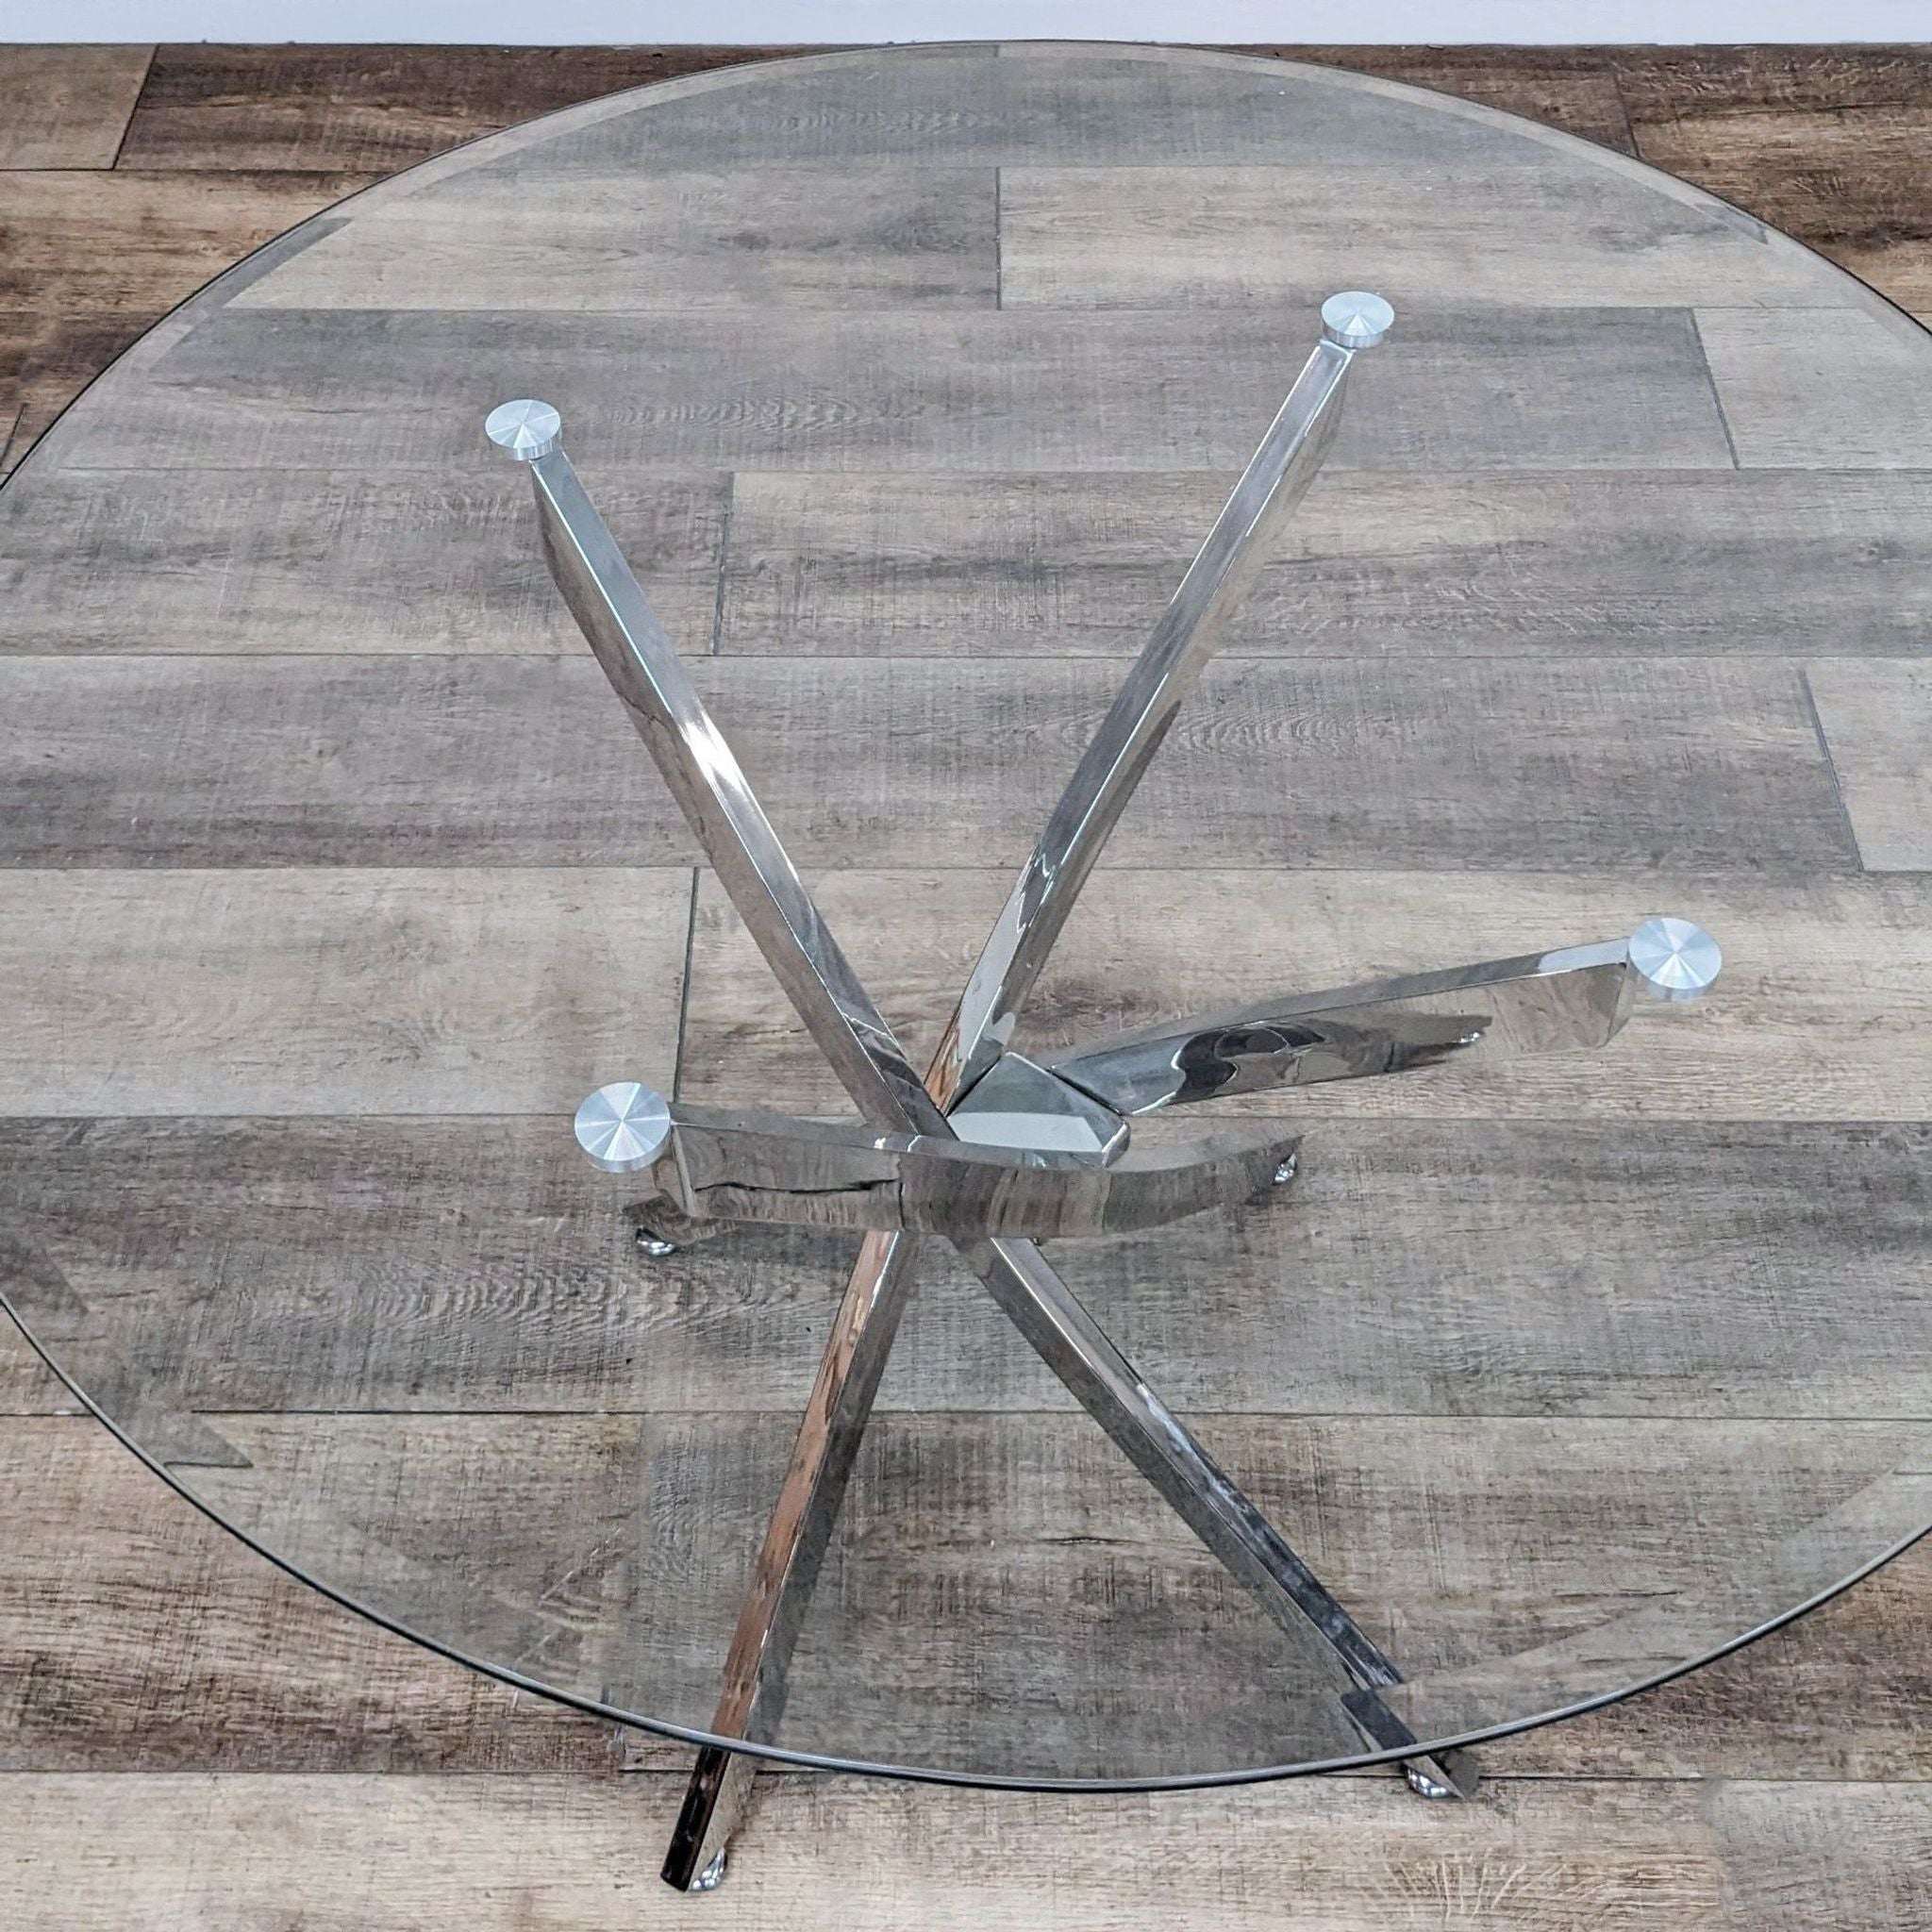 Top view of Reperch dining table showing the round glass surface and intersecting metal legs, placed on a wood-patterned floor.